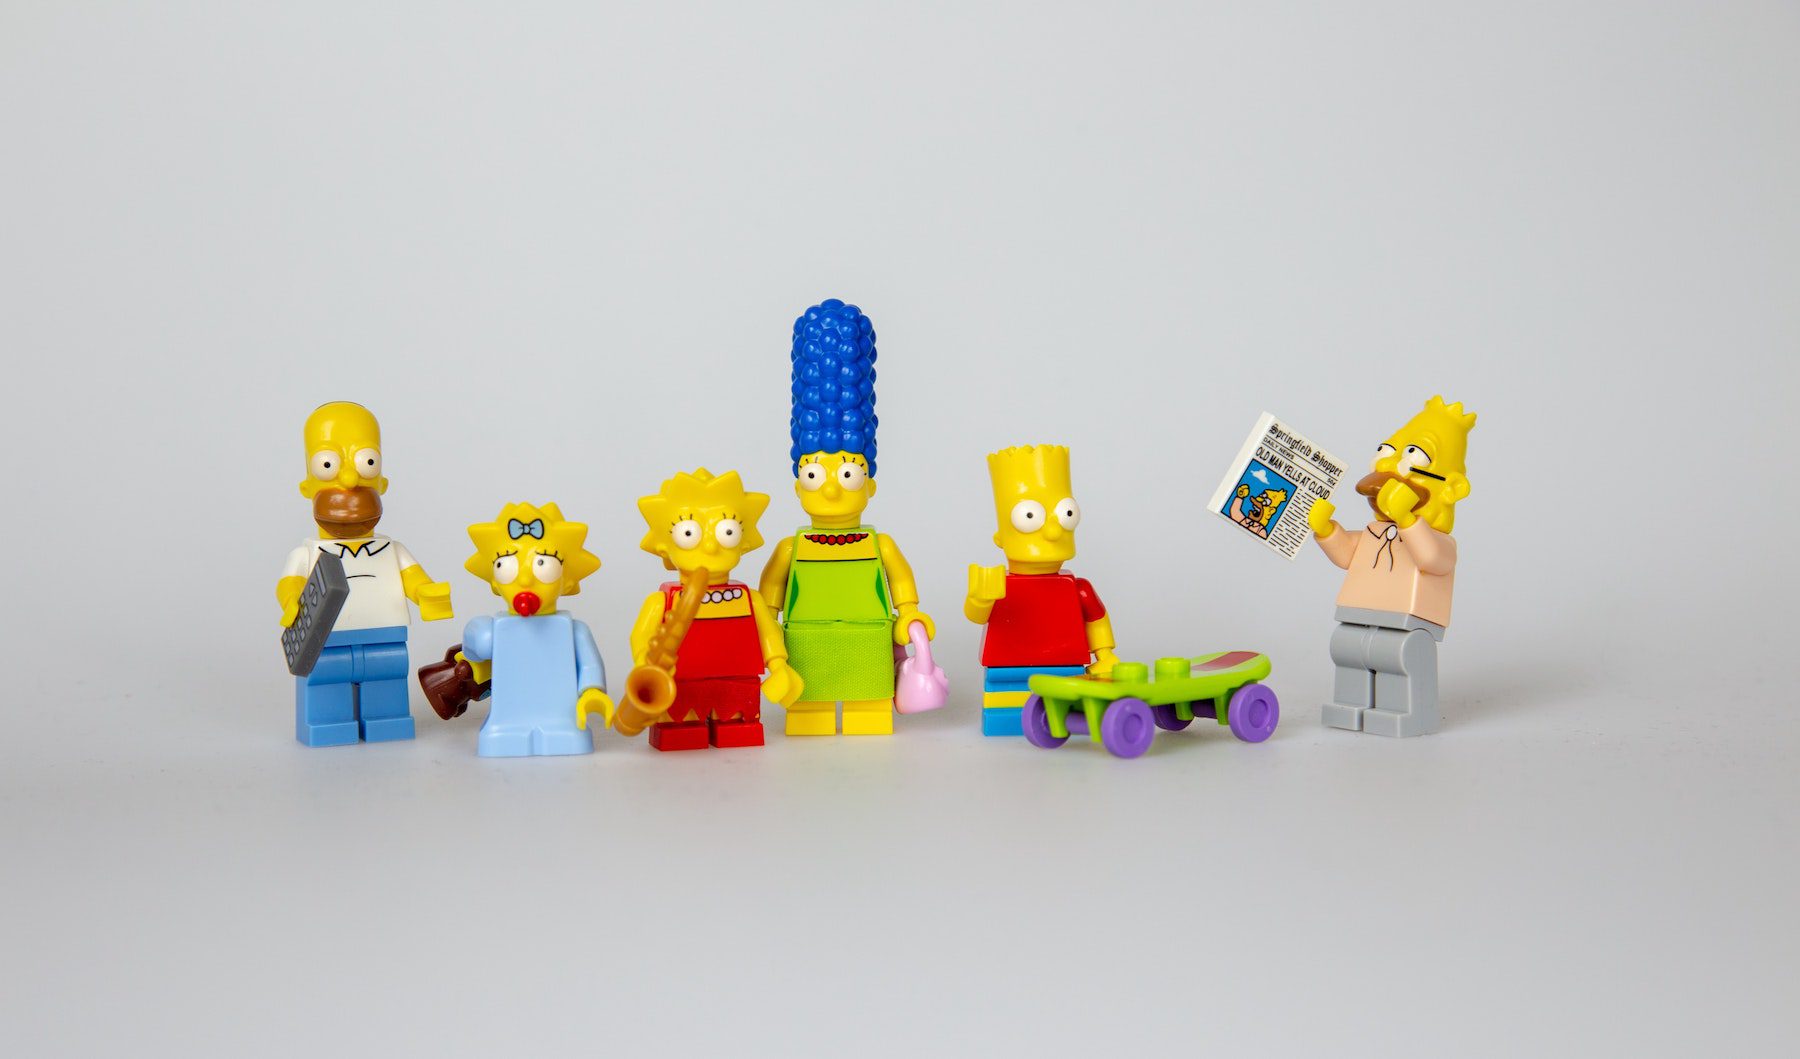 Lego minifigs of the Simpsons family. From left to right: Homer, Maggie, Lisa, Marge, Bart and his skateboard, and Grandpa Abraham Simpson holding a newspaper and yelling at the sky.